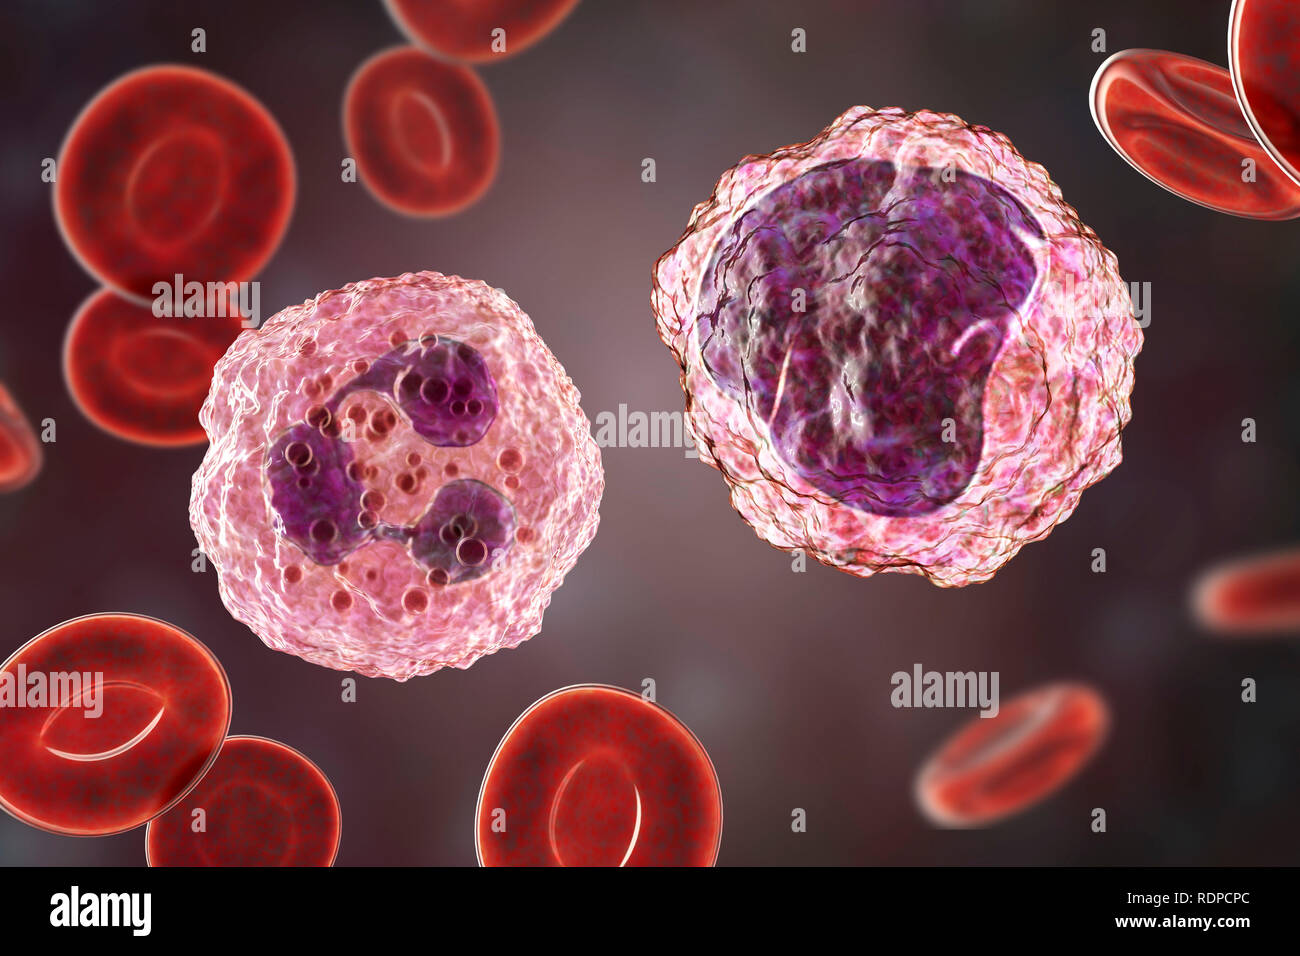 Neutrophil (left) and monocyte (right) white blood cell in blood smear, computer illustration. Neutrophils are the most abundant white blood cell and are part of the body's immune system. Monocytes are the largest white blood cells; they engulf and digest invading bacteria and cell debris. Stock Photo